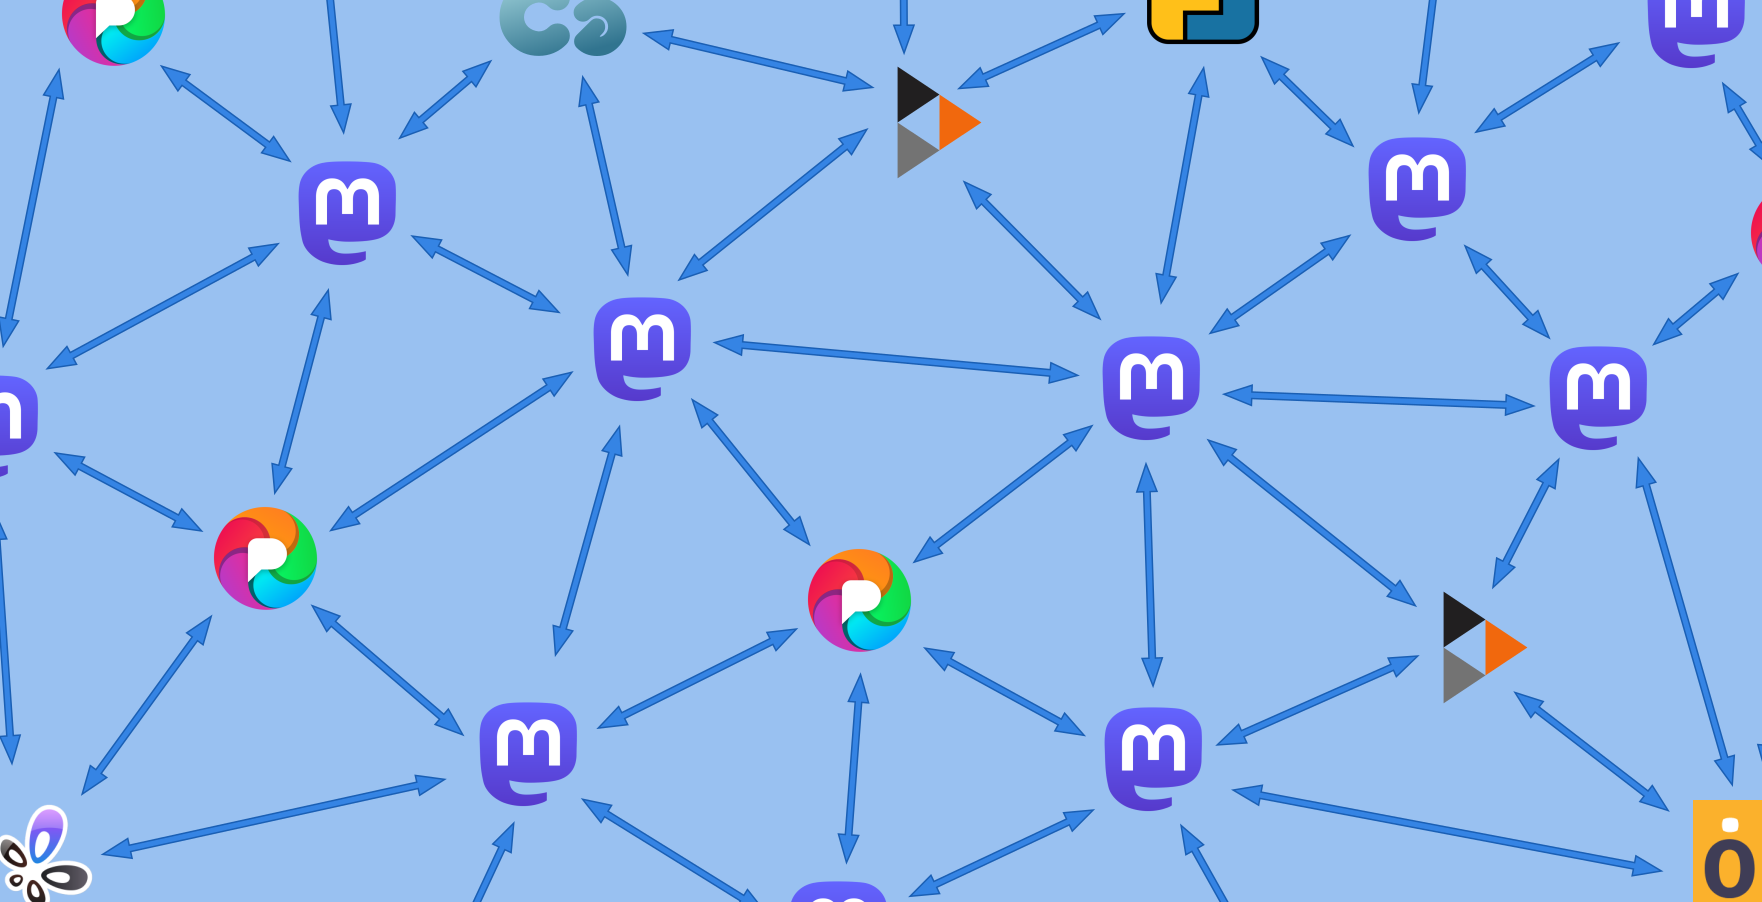 A visual representation of the fediverse as a network of communicating servers